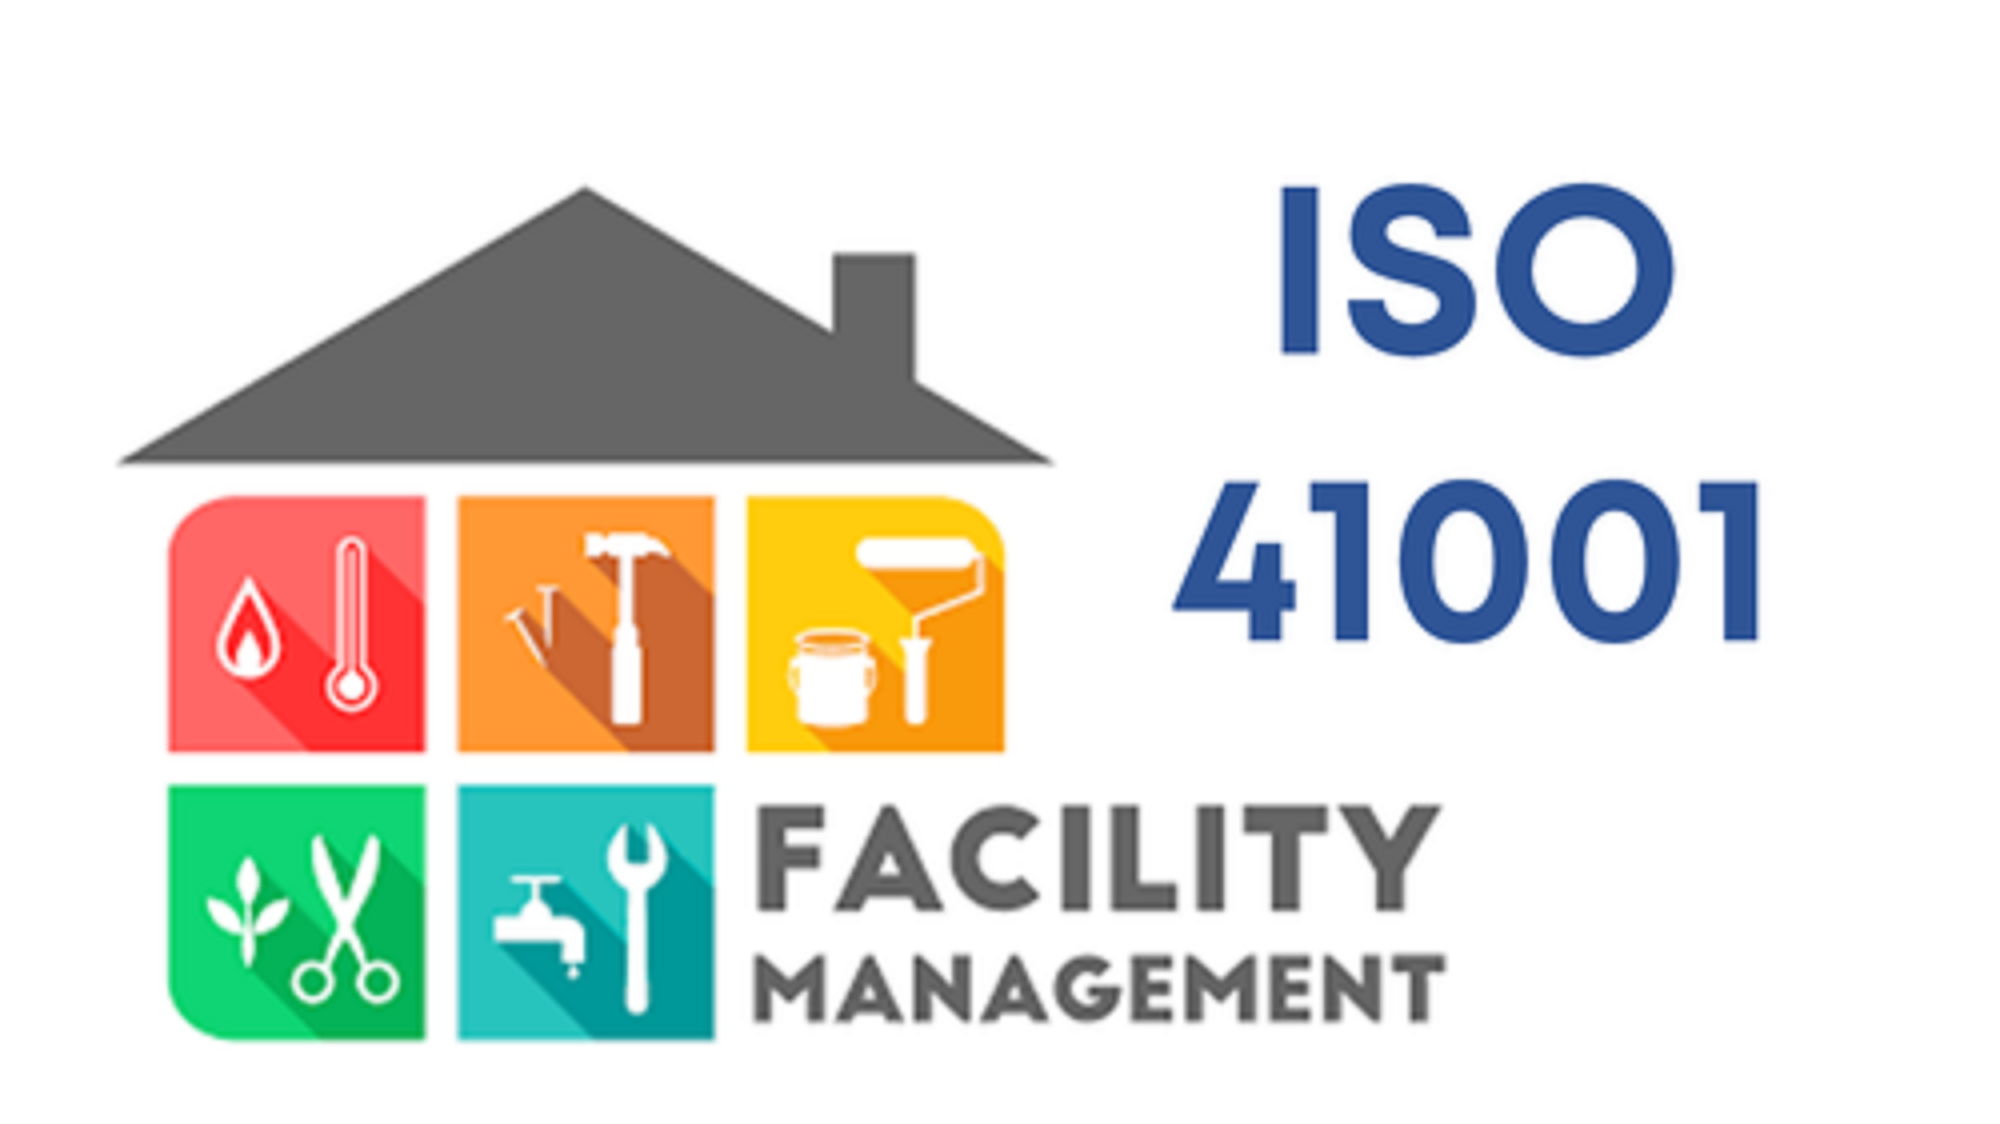 ISO 41001:2018 FACILITY MANAGEMENT SYSTEM ( FMS)